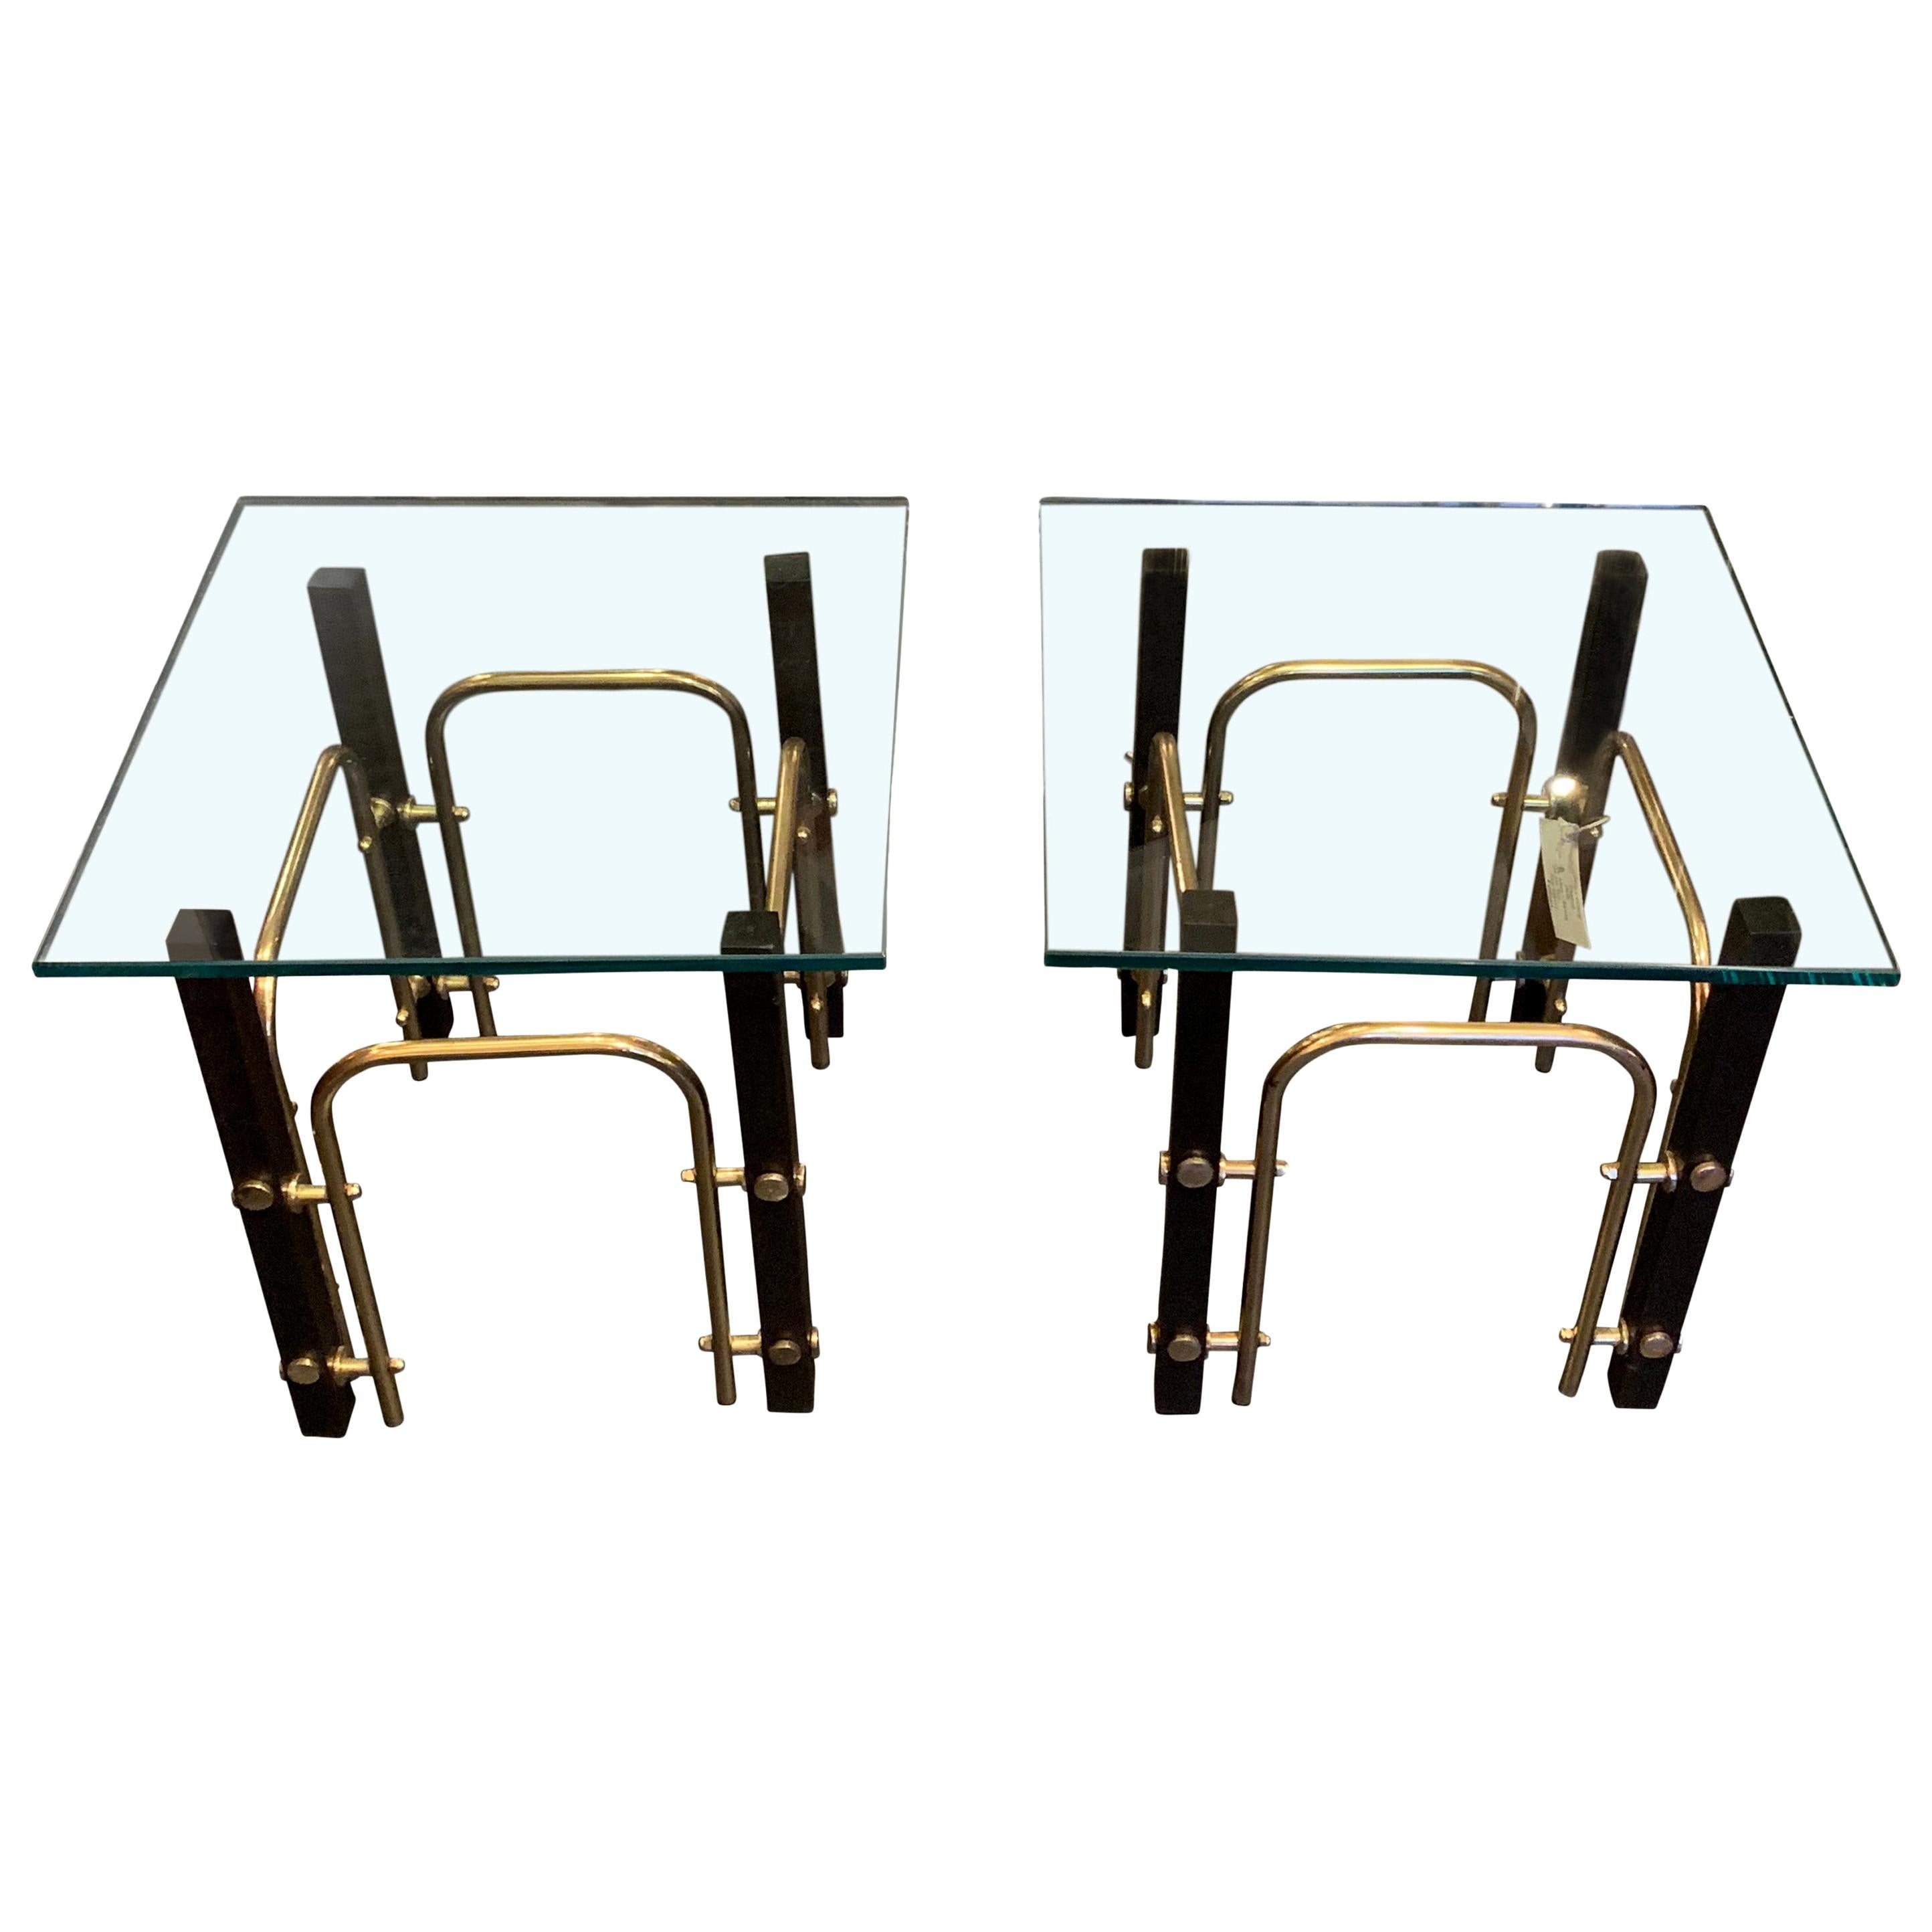 Black and Brass Square Glass Top Pair of Coffee Tables, France, Midcentury